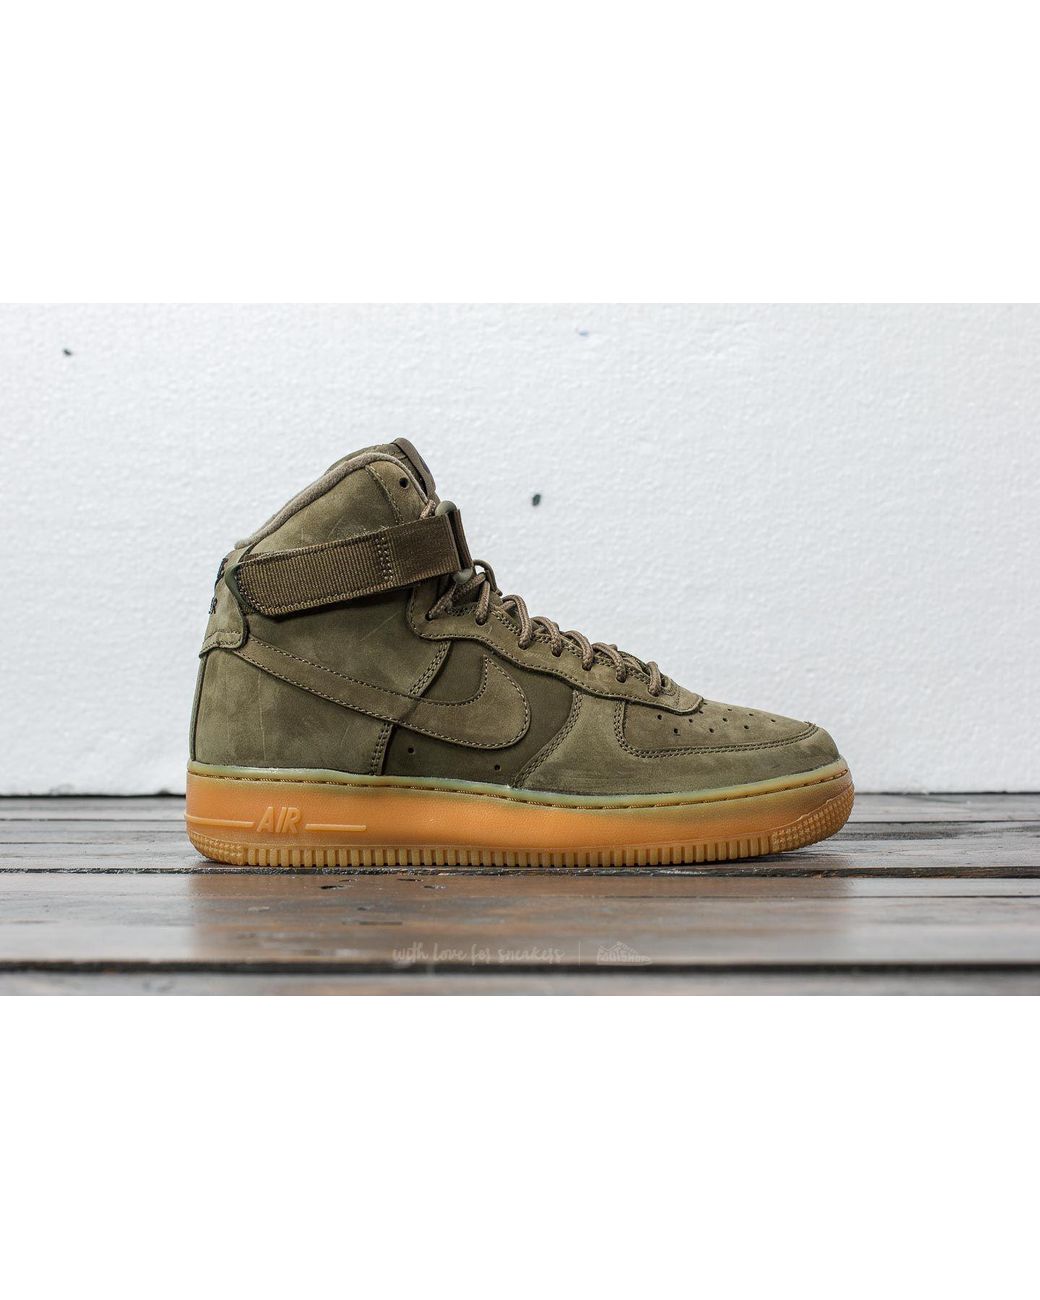 olive green high top forces